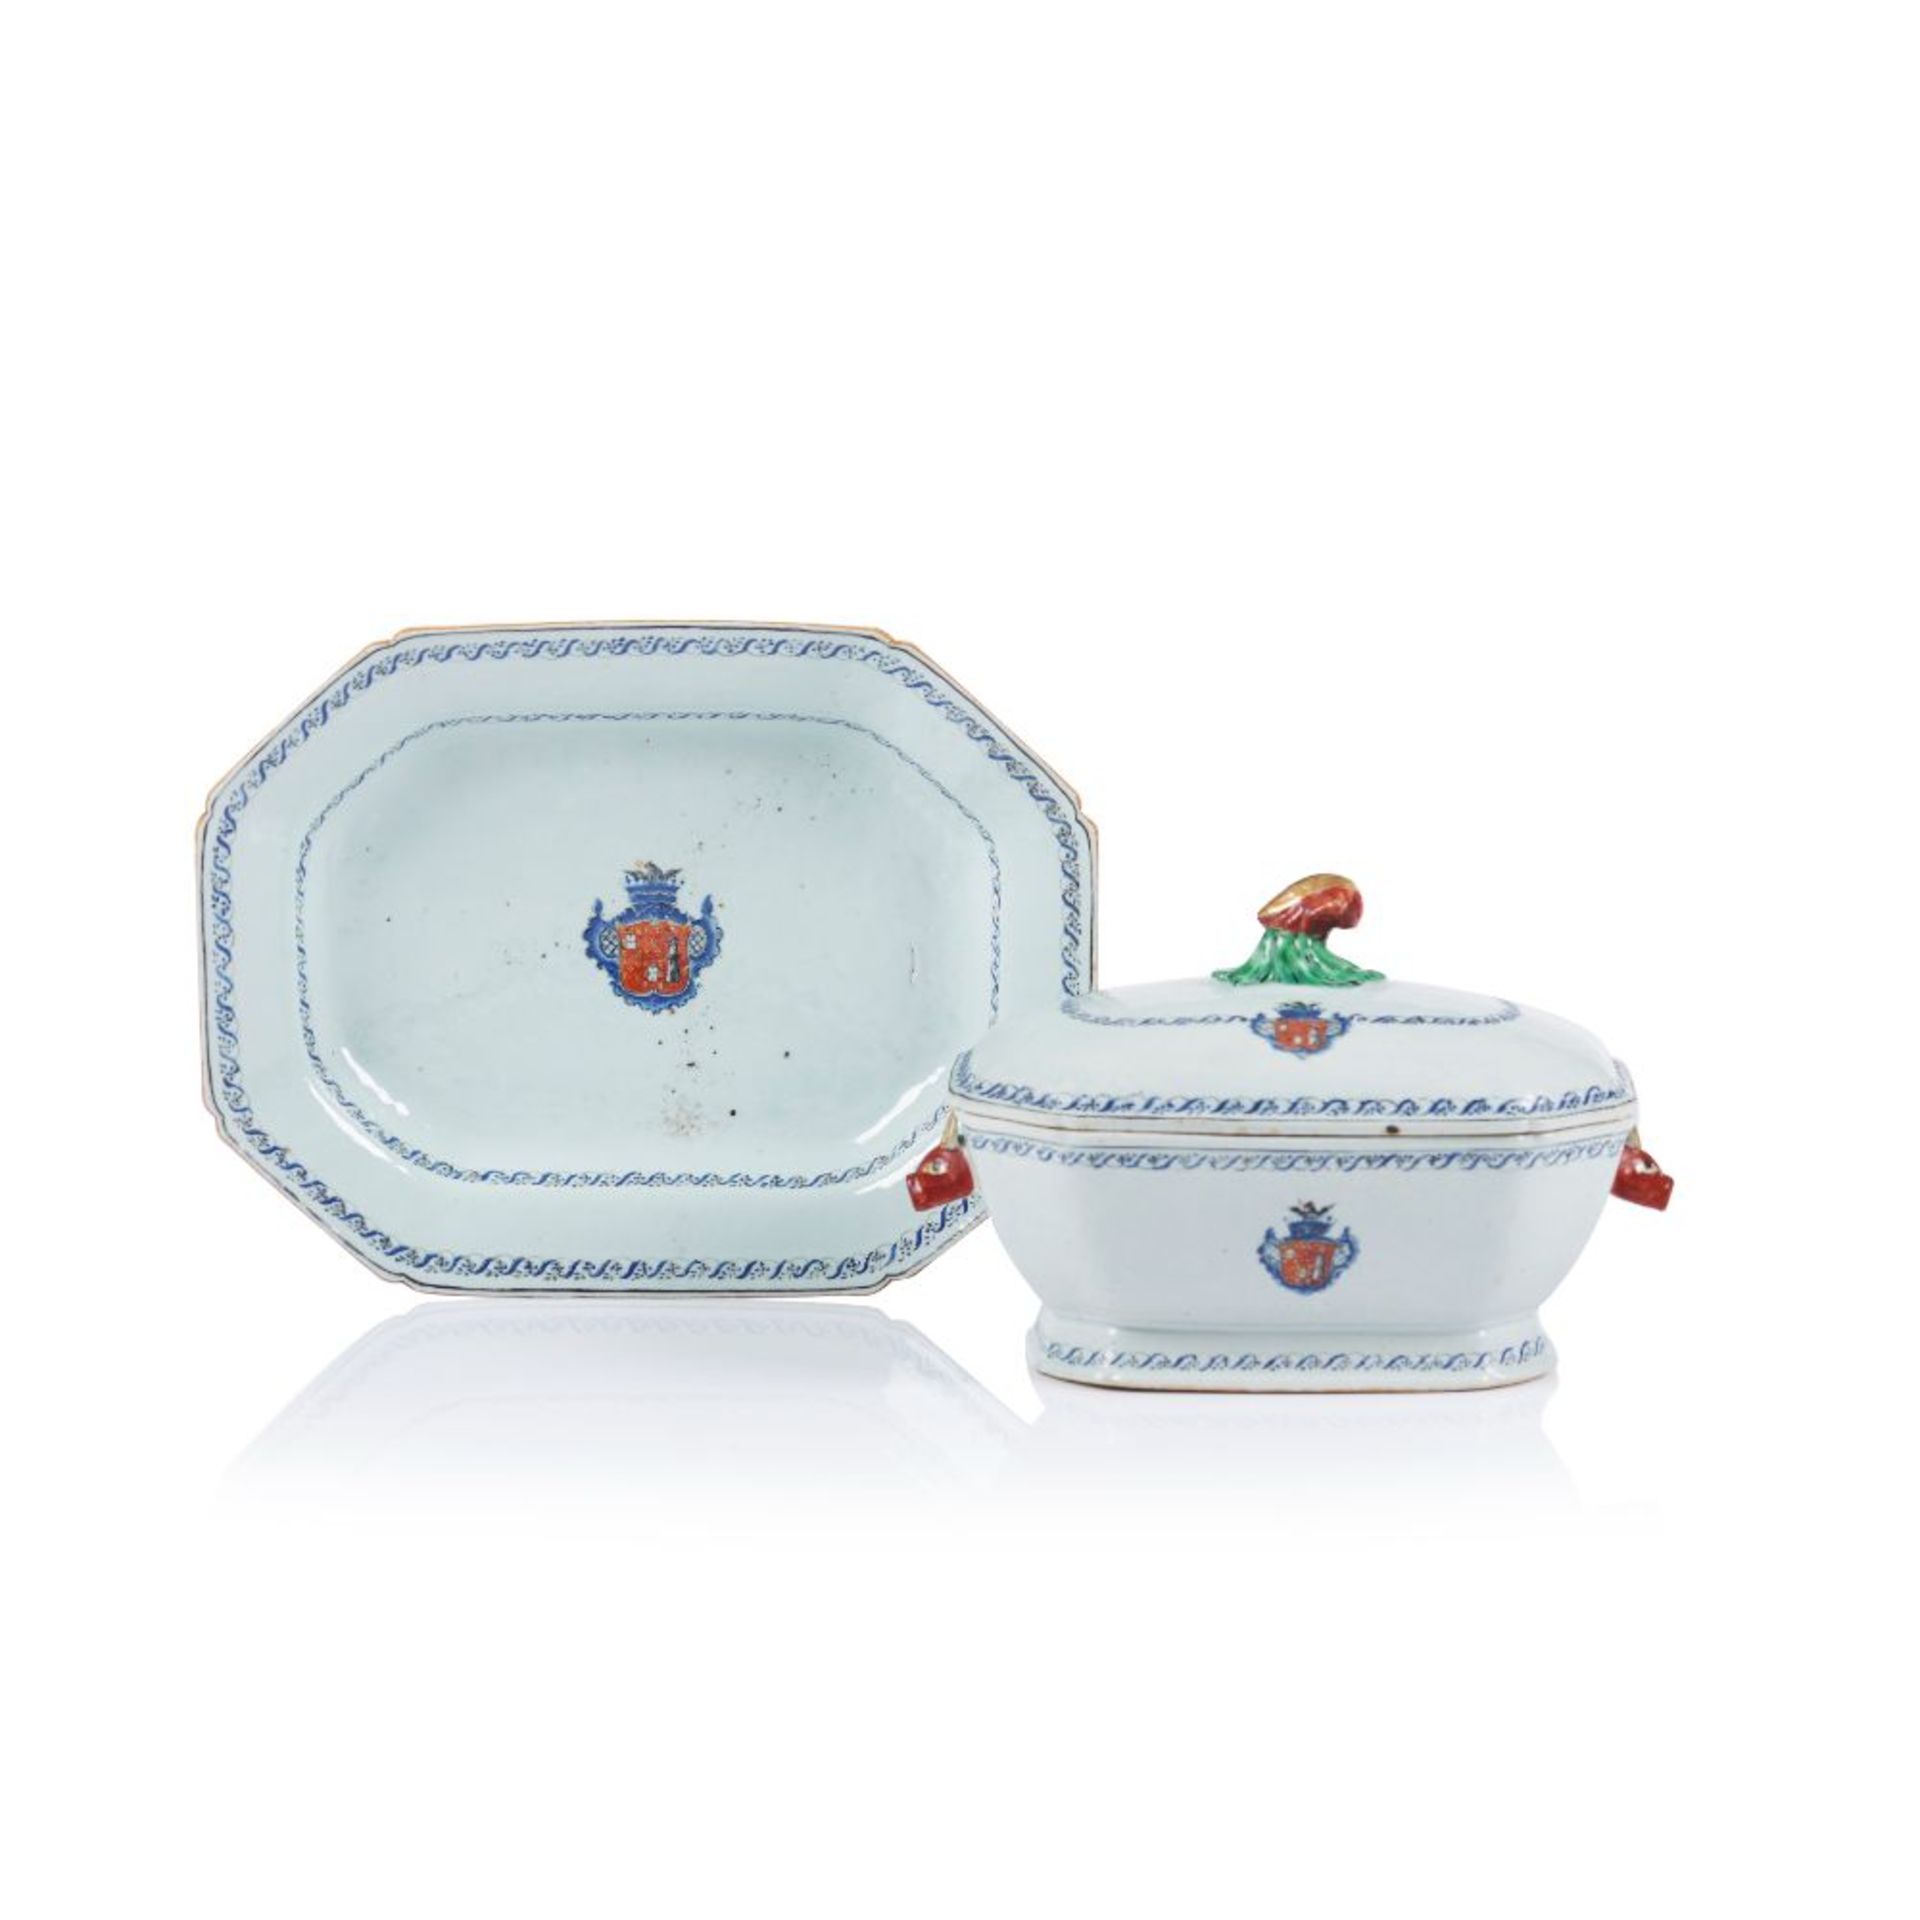 Armorial tureen with cover and tray